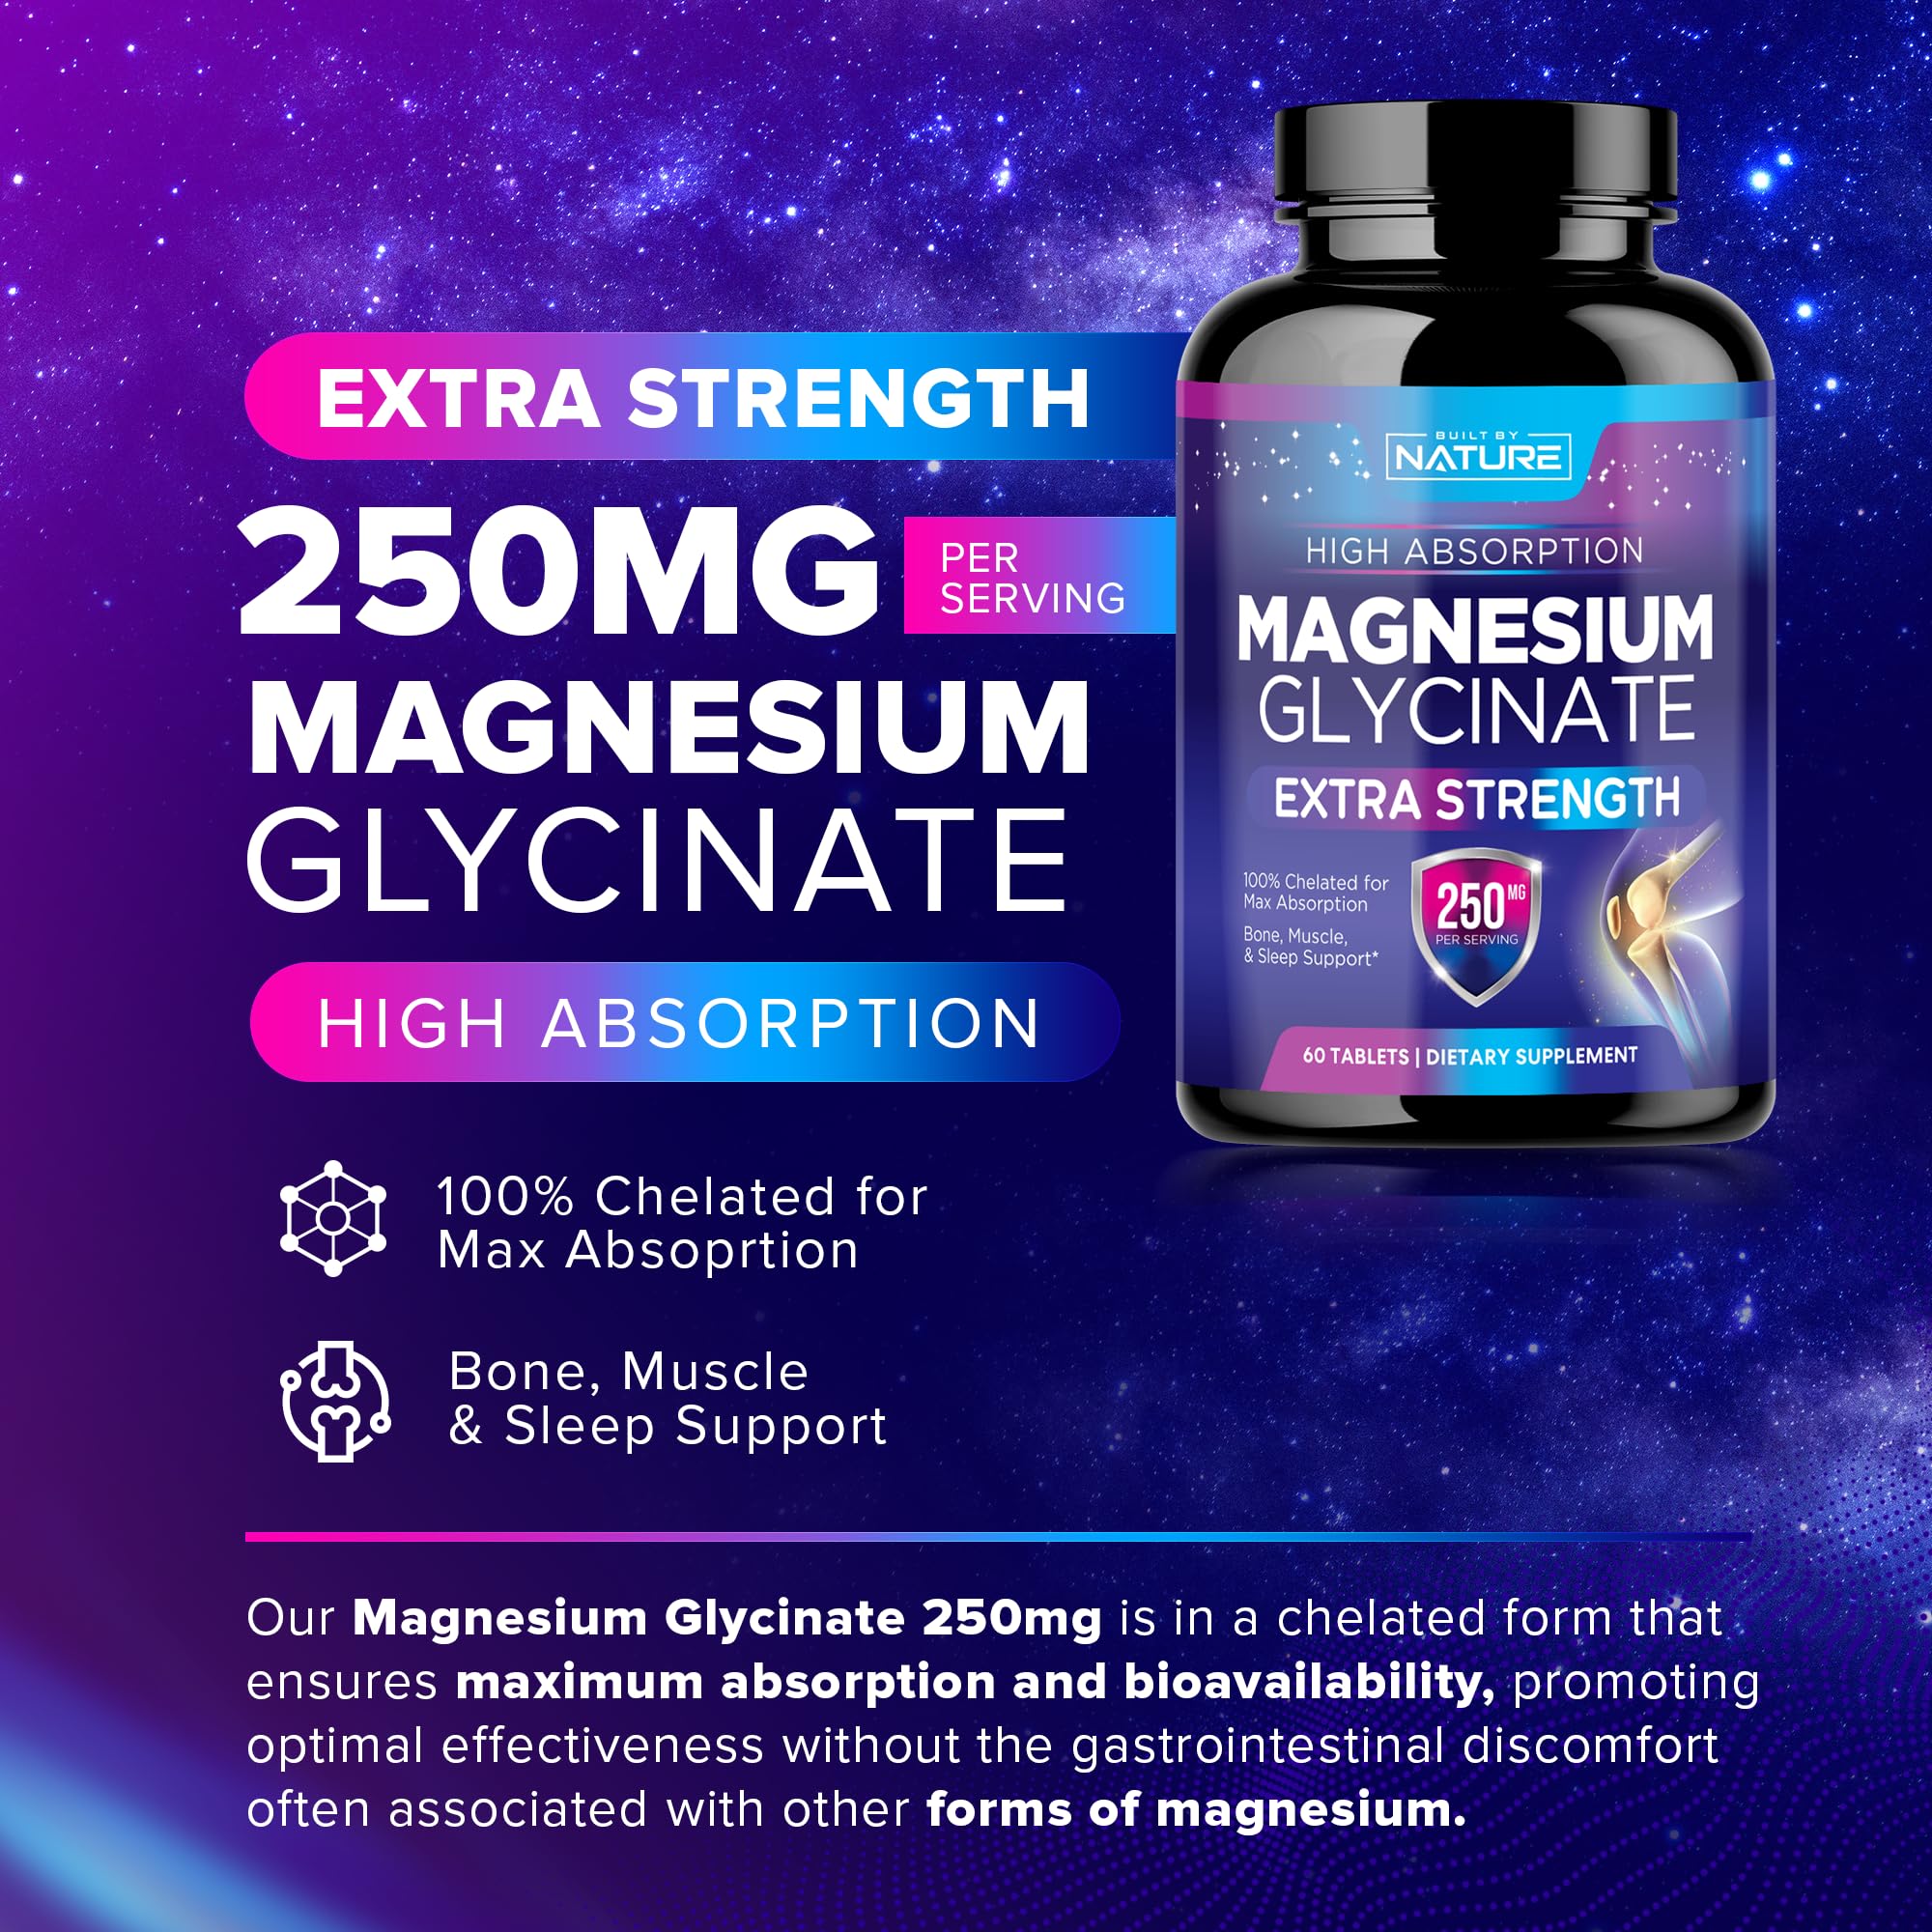 Magnesium Glycinate 250mg - High Absorption Chelated Magnesium Supplement - 100% Pure Magnesium Glycinate - Stress, Sleep, Heart, and Muscle Health Support - Non-GMO, Vegan, Gluten-Free